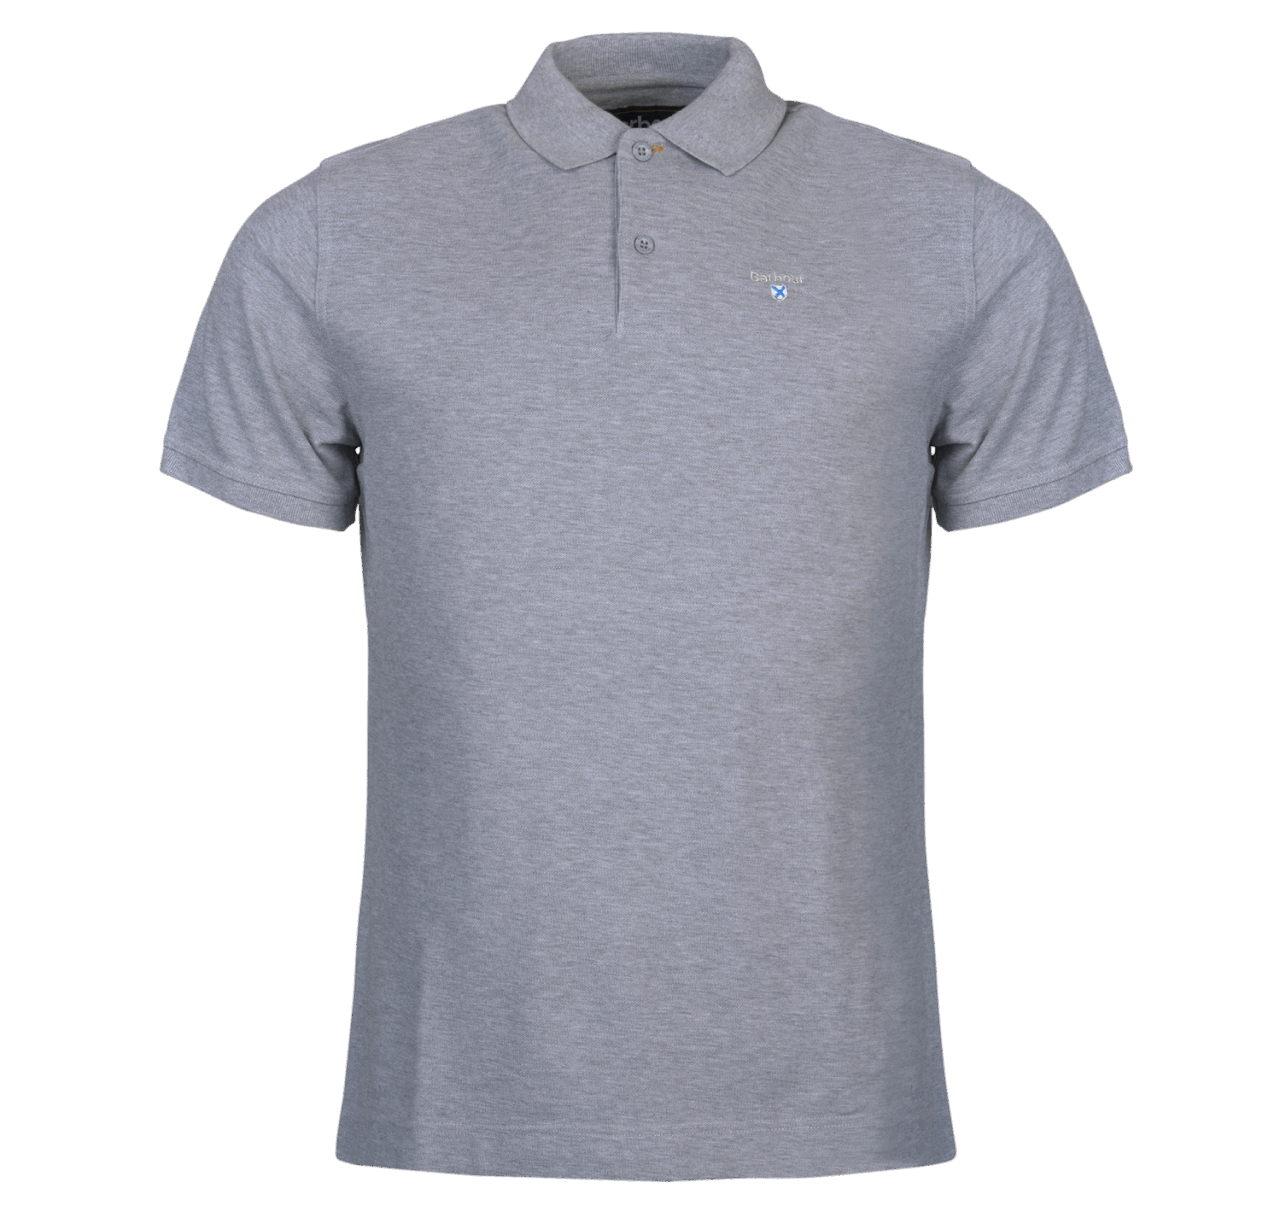 Barbour Sports Polo - grey marl